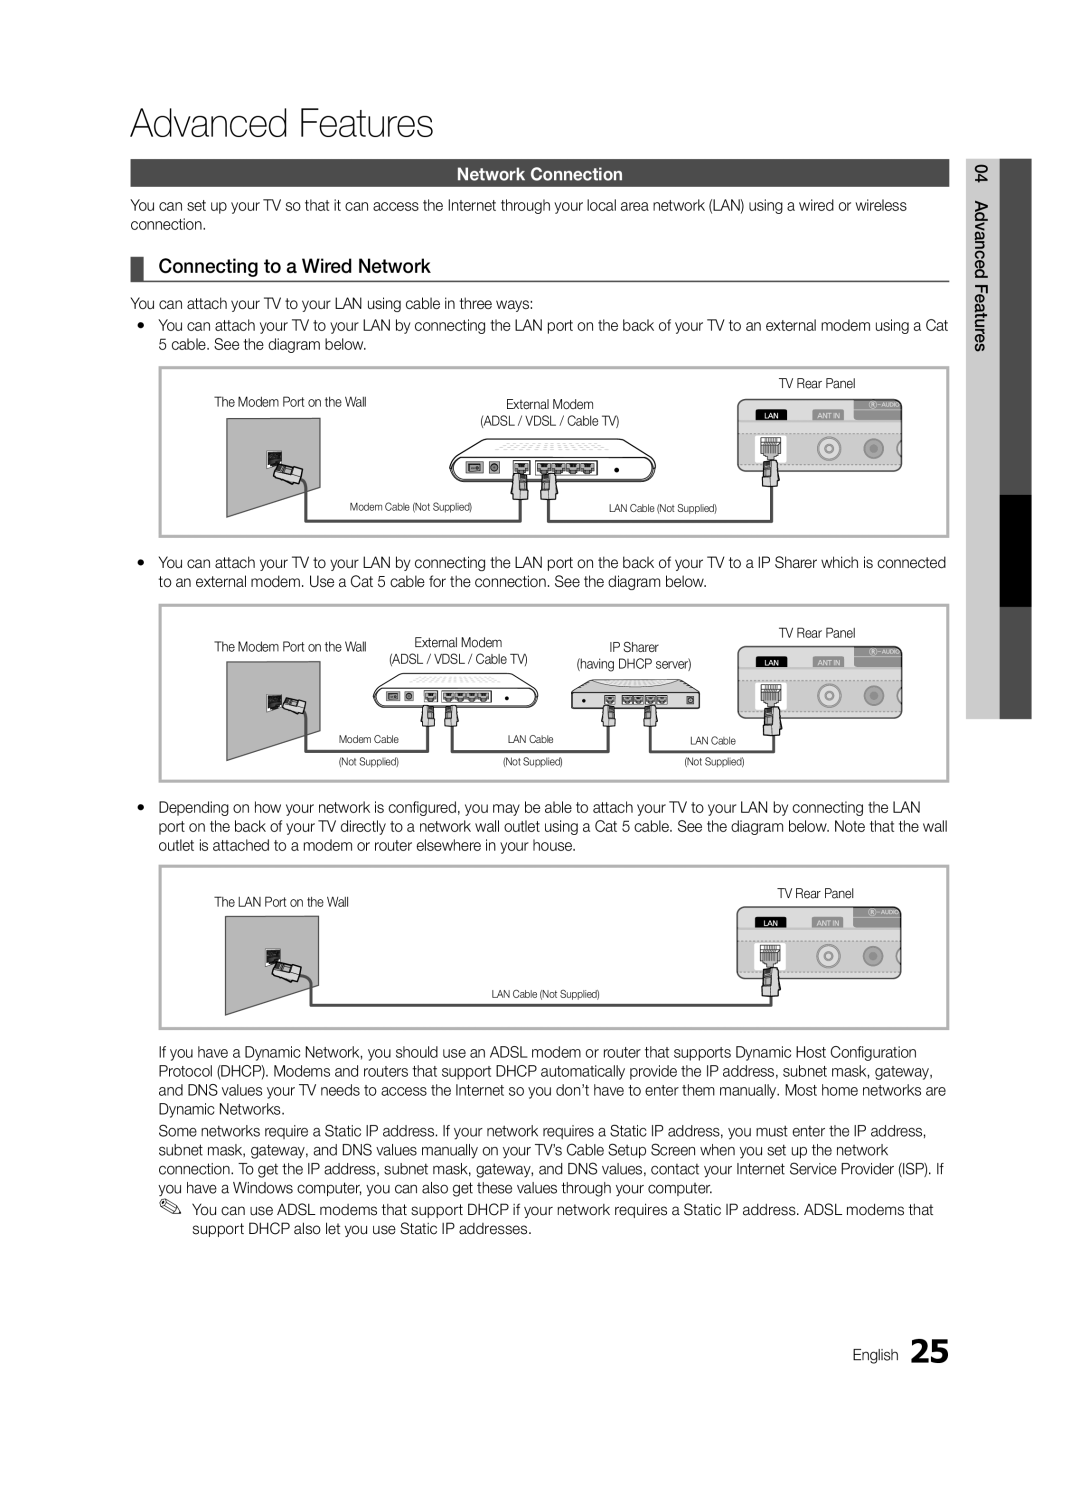 Samsung 6800 user manual Advanced Features, Connecting to a Wired Network, Network Connection 